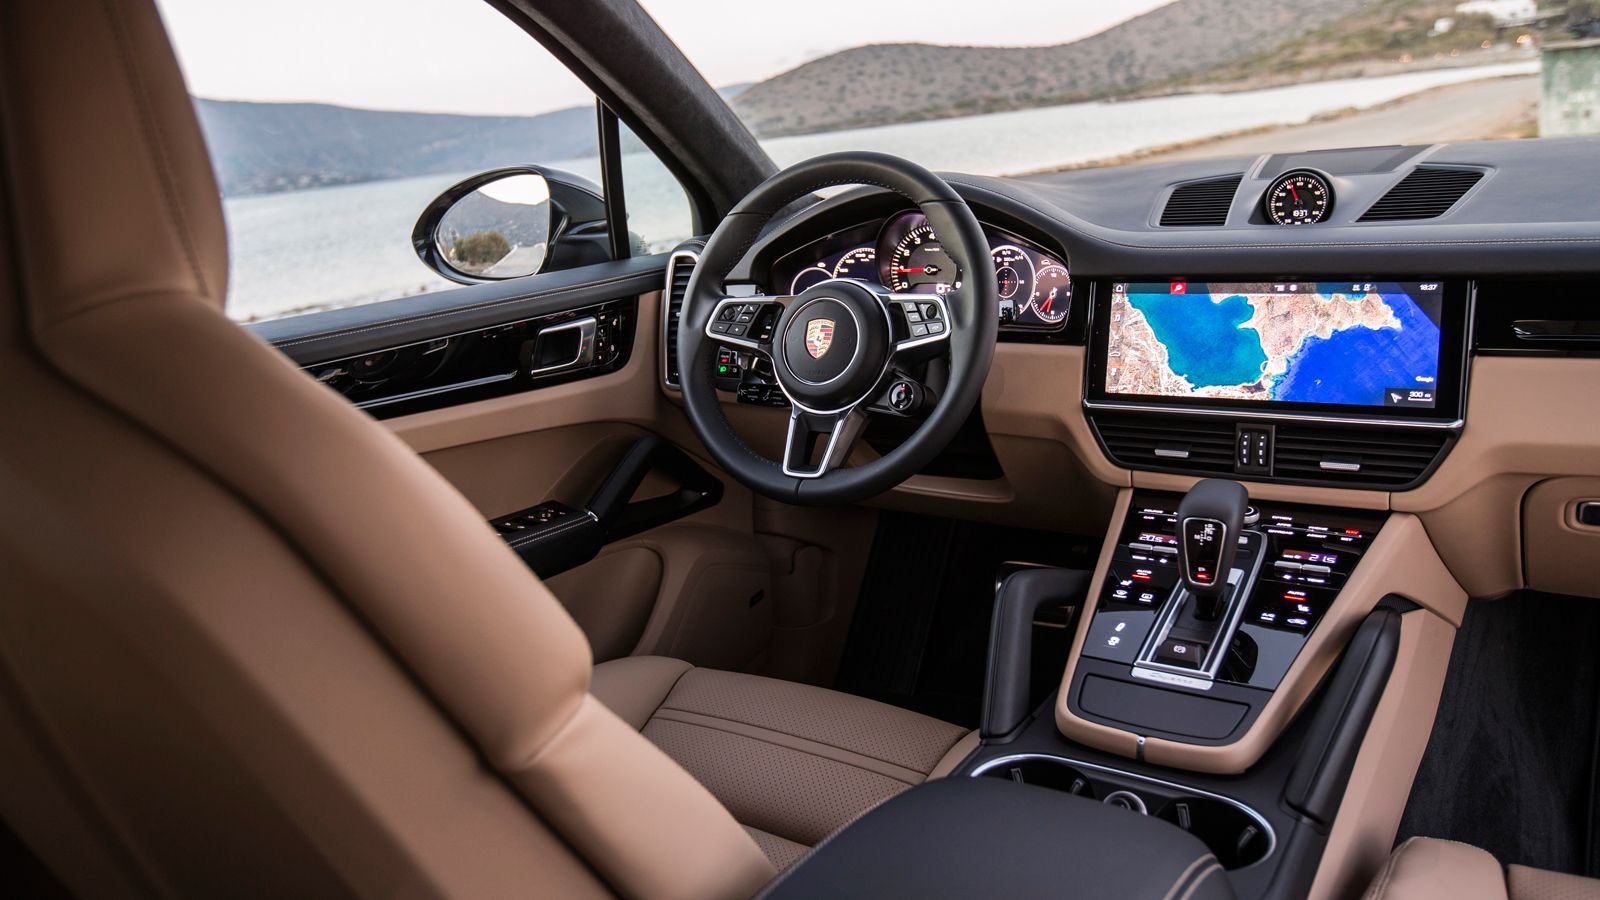 2019 Porsche Cayenne S drive review: Everything you need to know